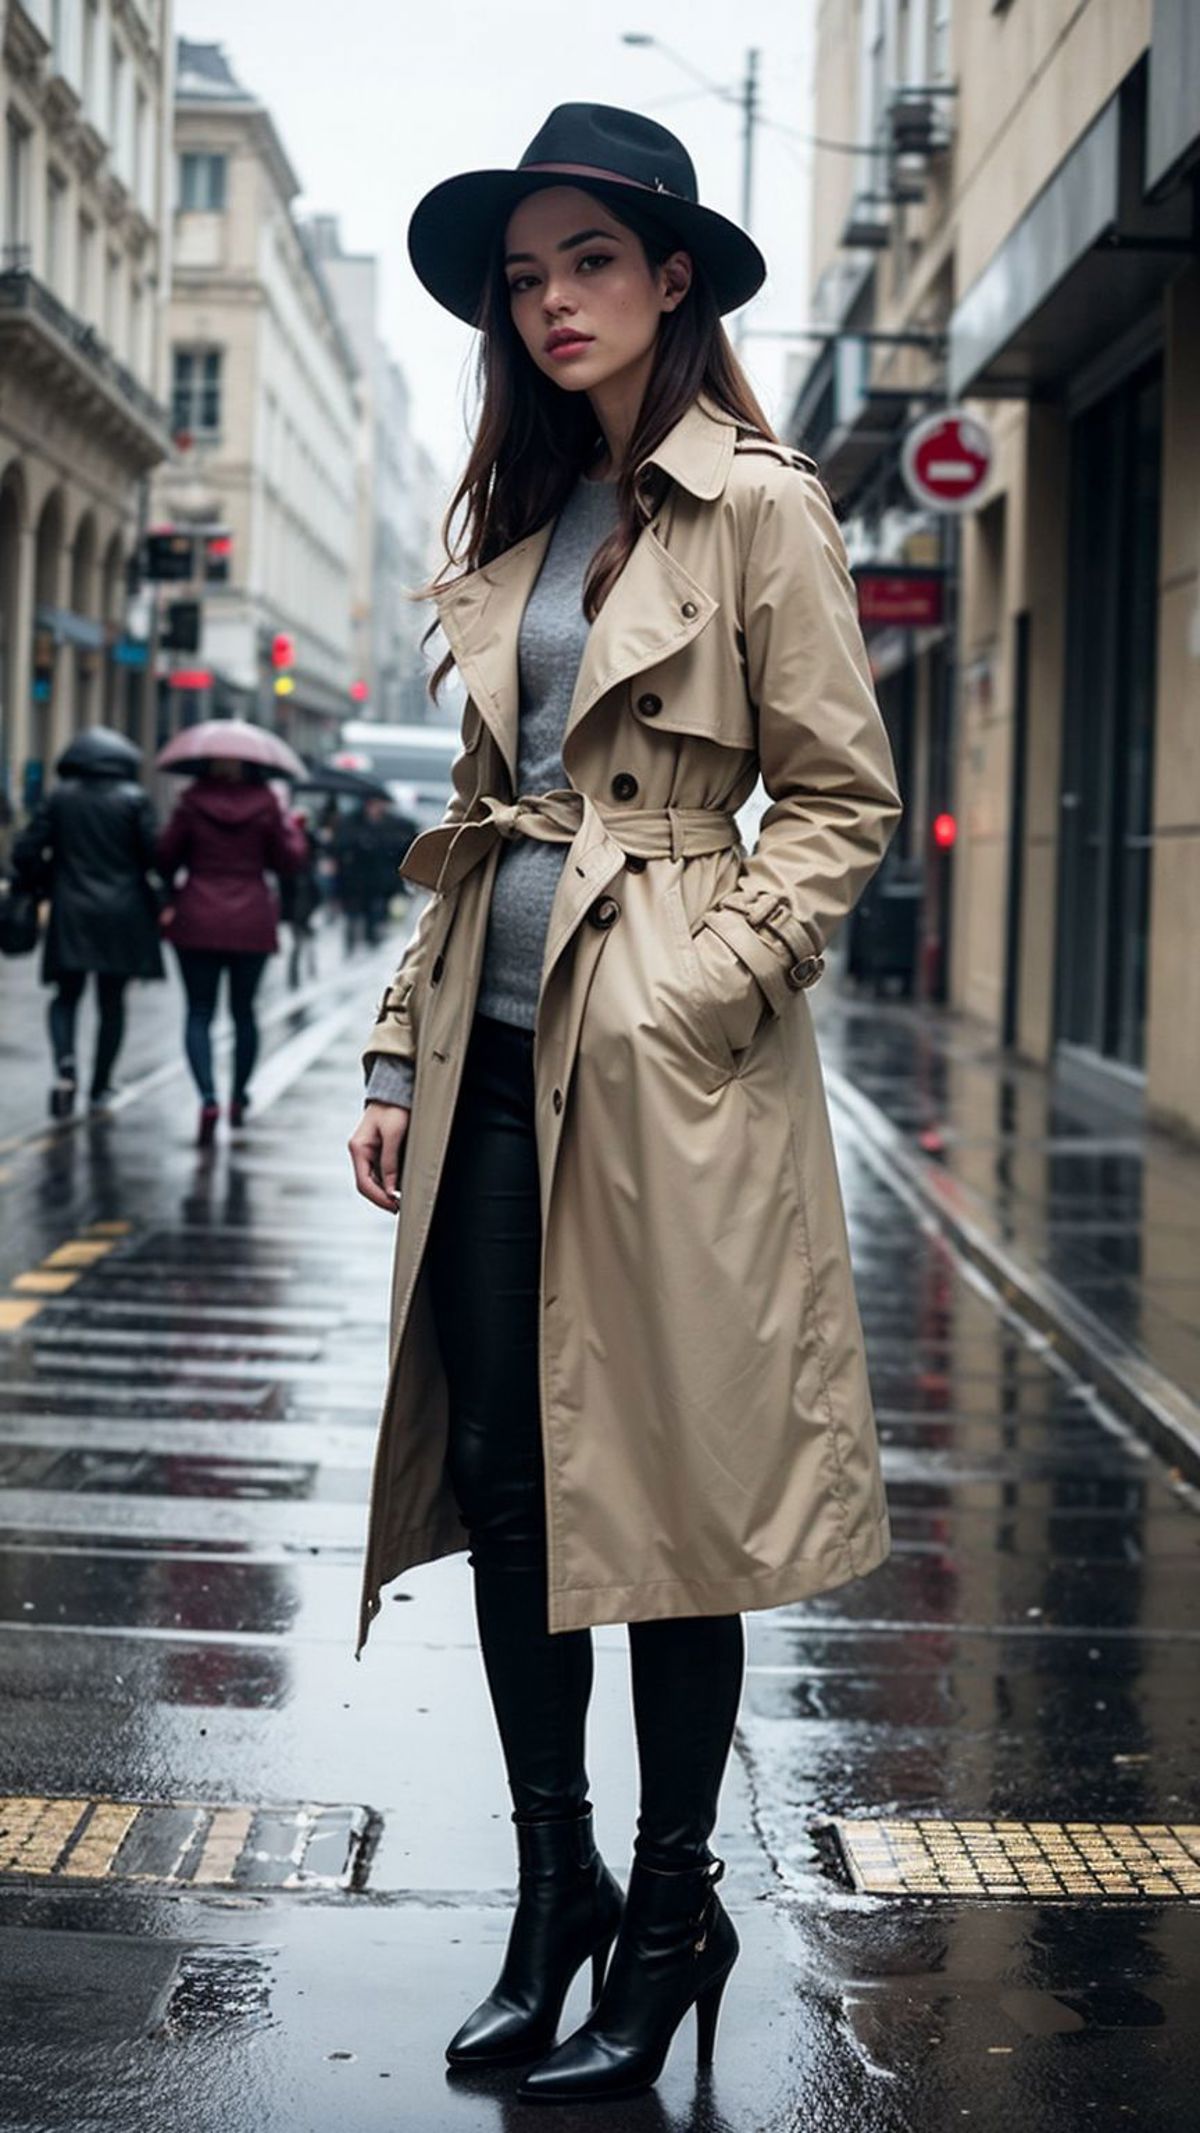 A woman wearing a tan trench coat and black pants stands on a city street.